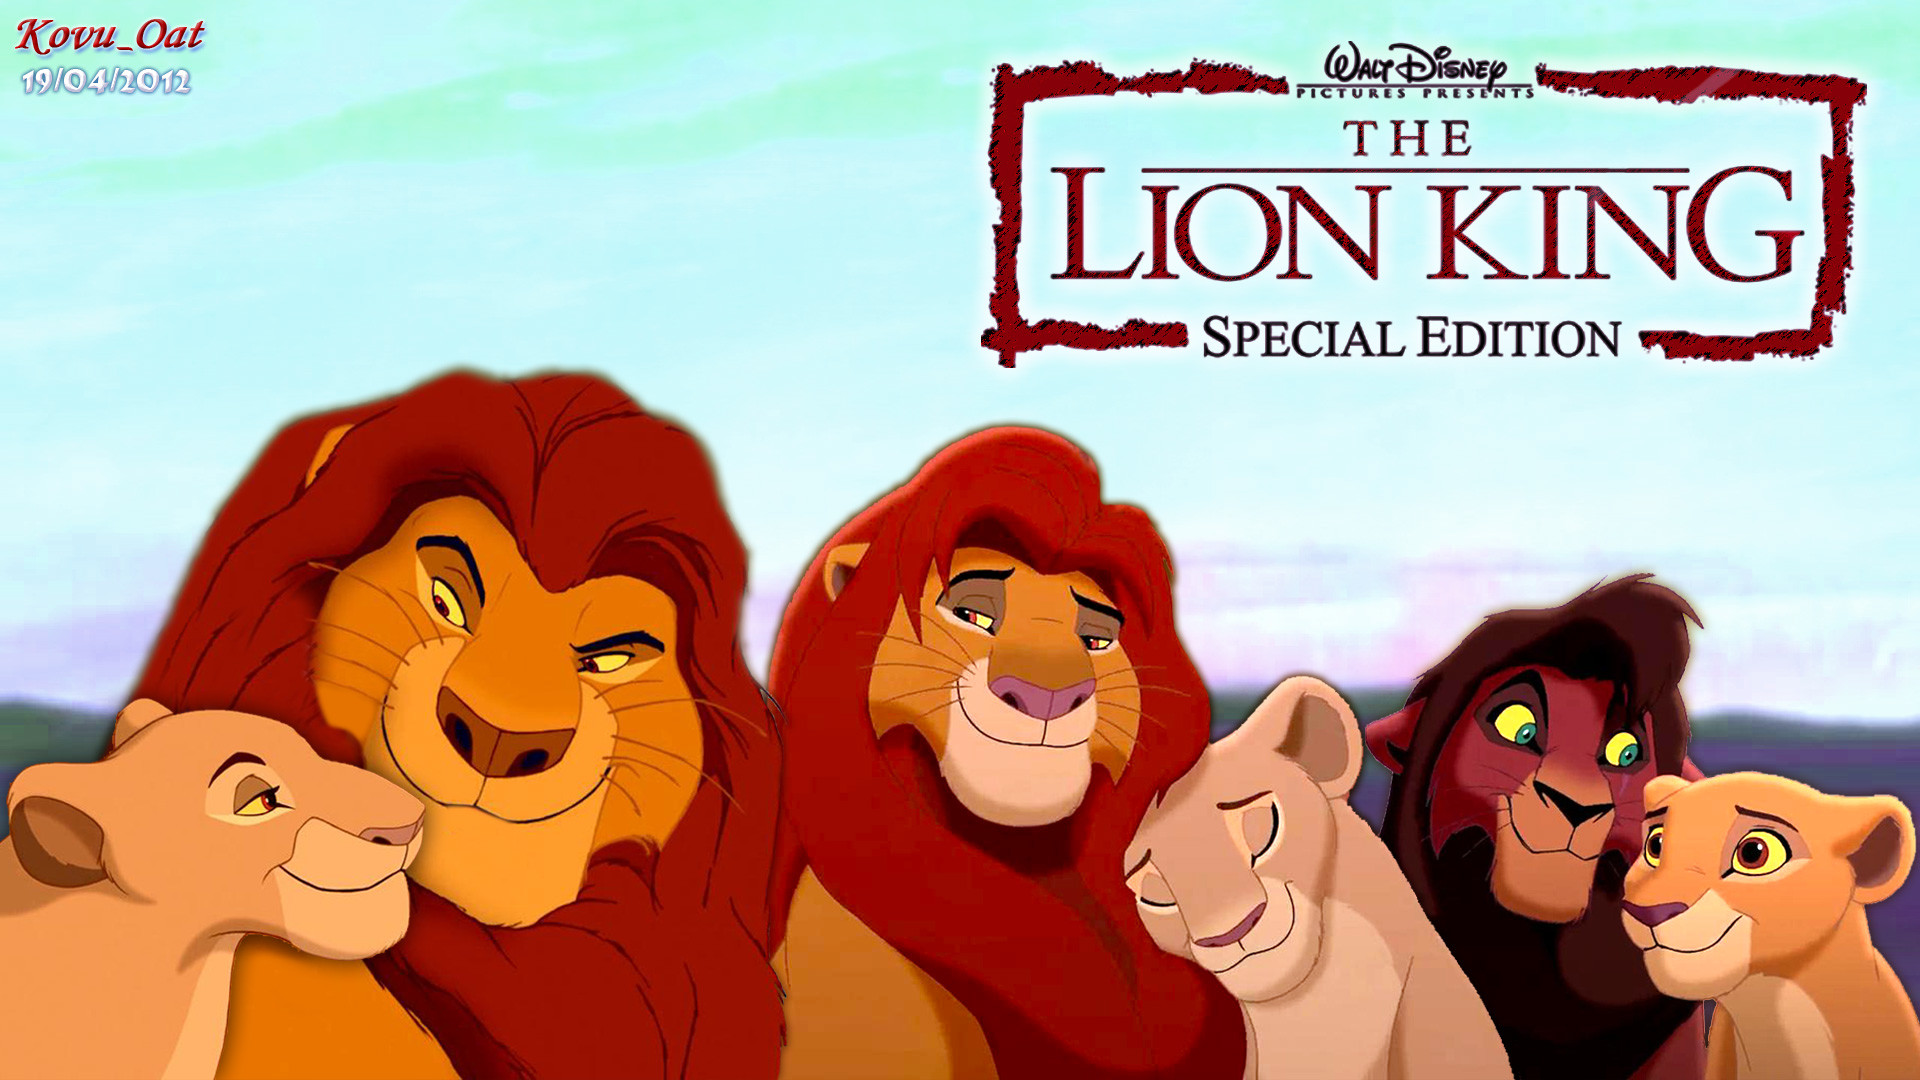 1920x1080 hajirah4 images Lion King Family HD wallpaper and background photos